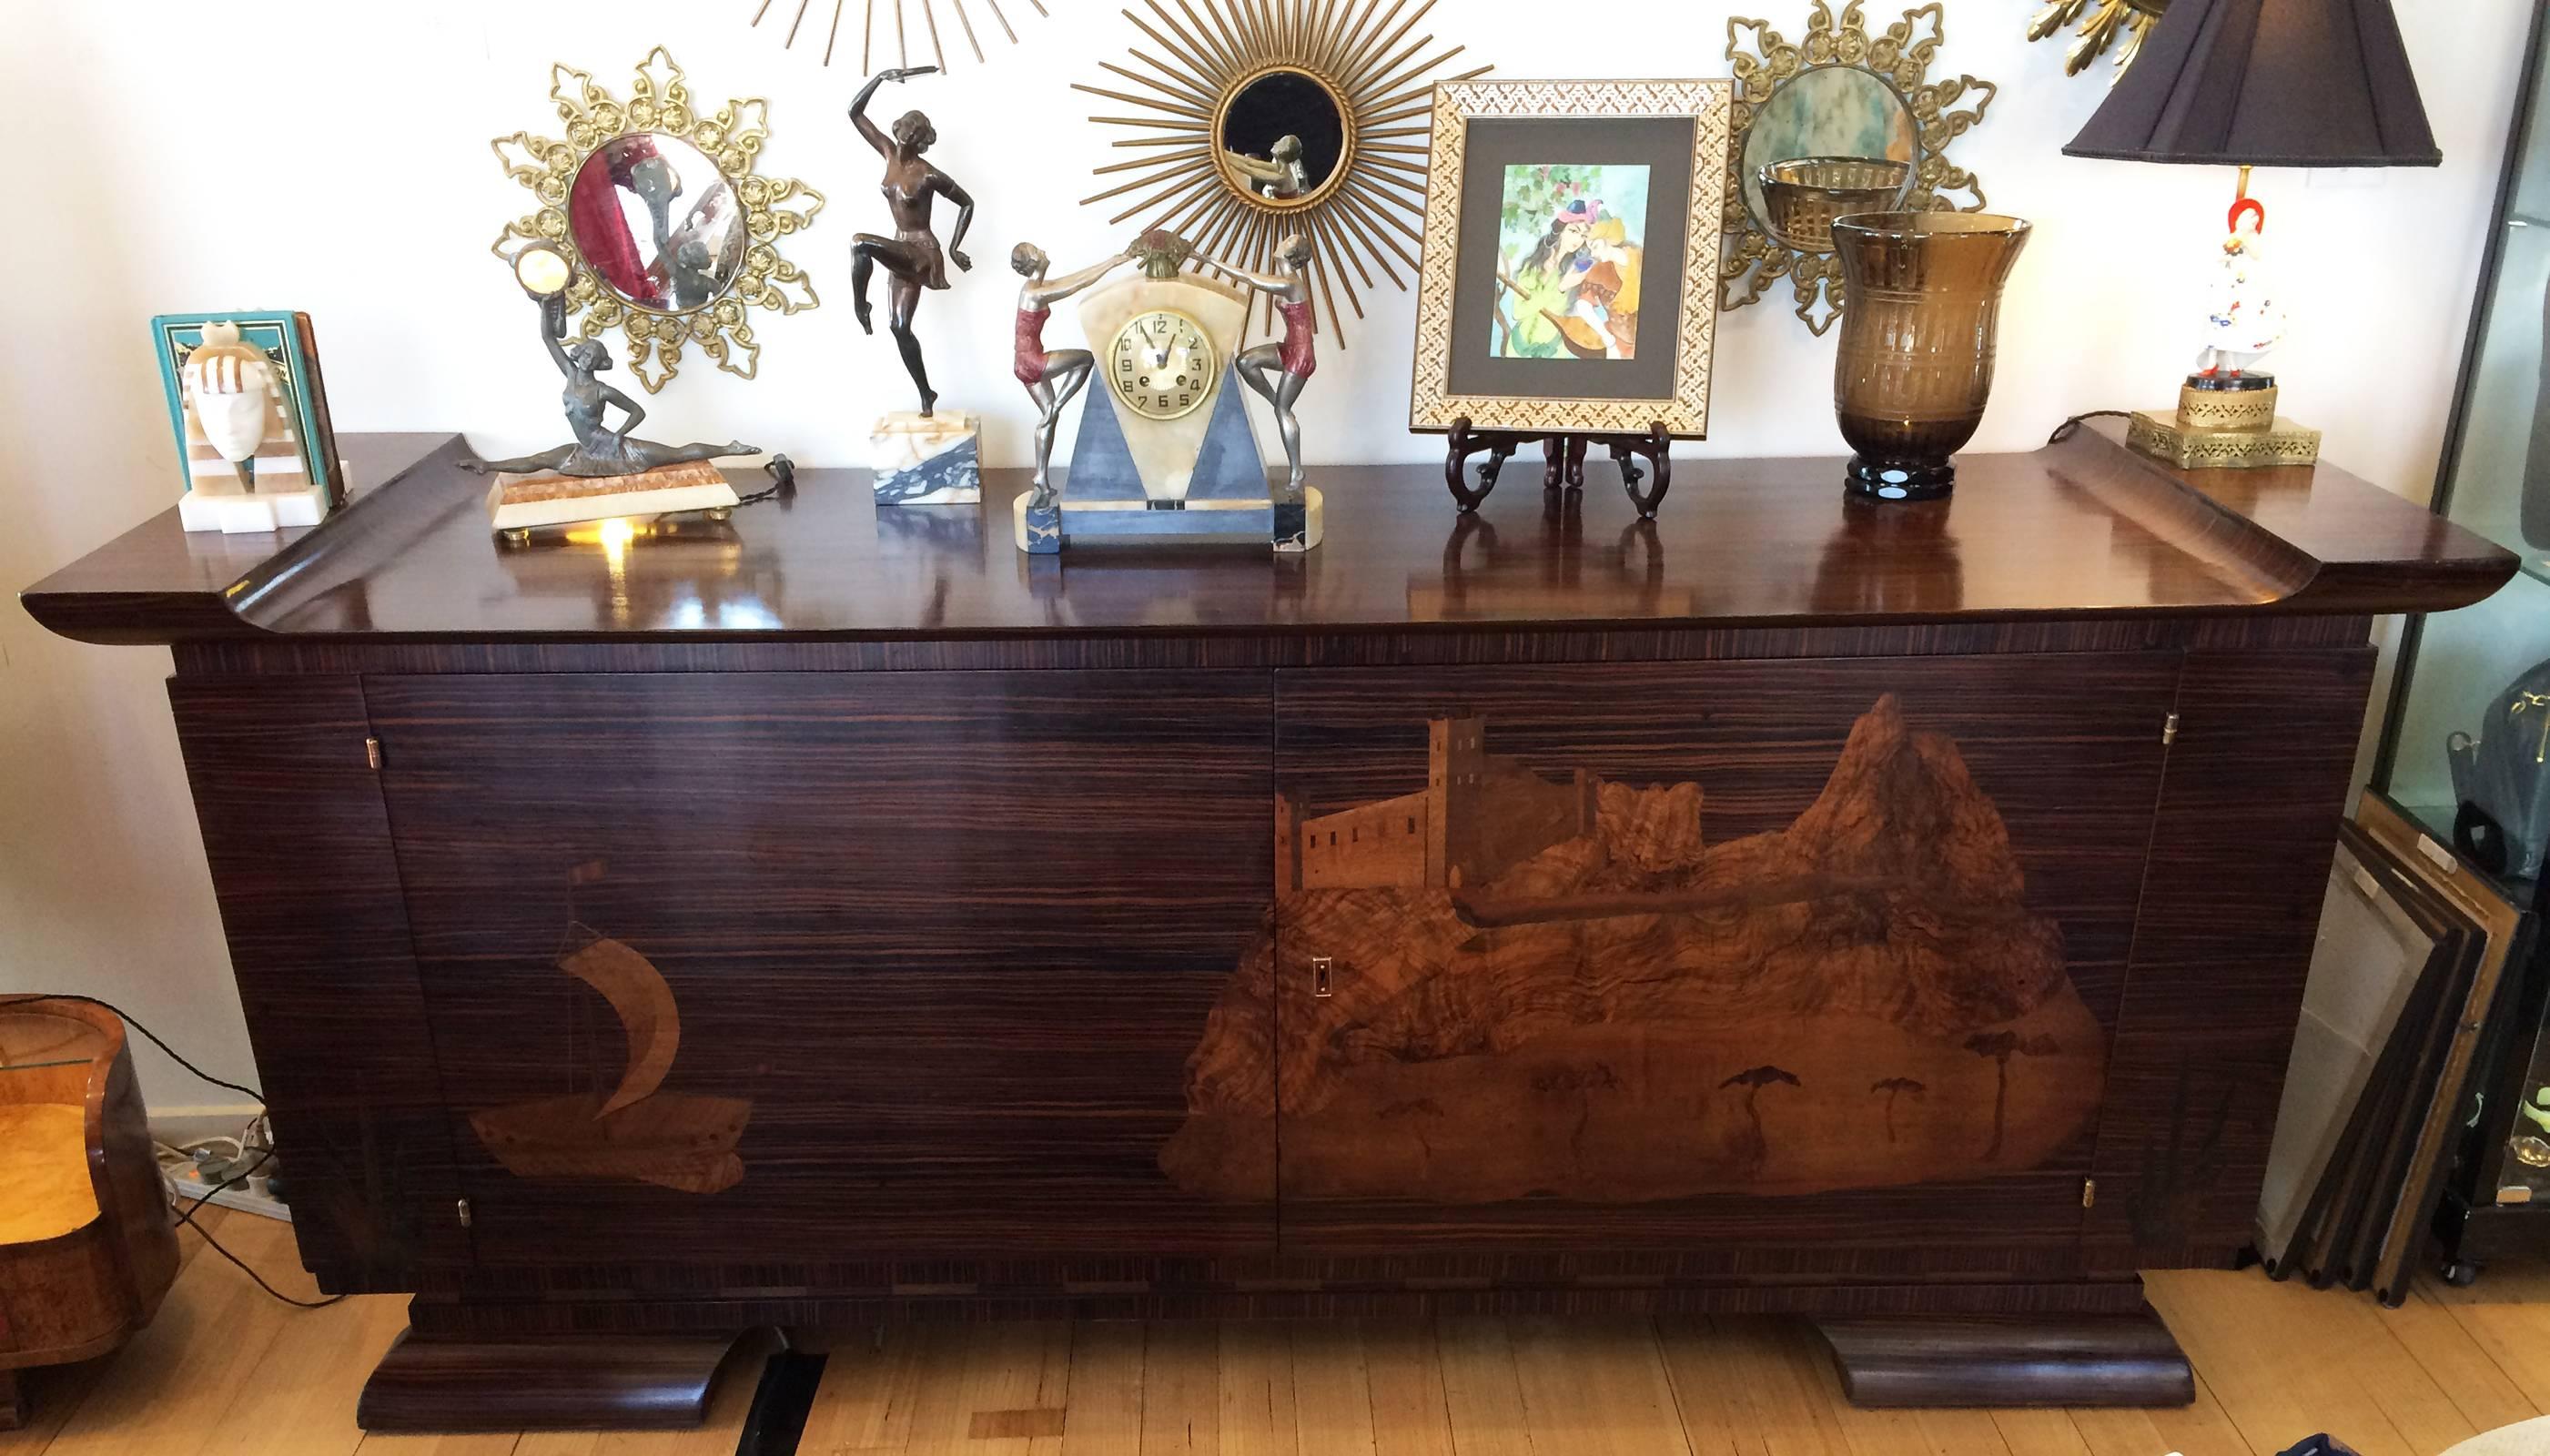 Art Deco, Czechoslovakian Large Sideboard in Macassar Wood with huge, finely detailed inlay of Castle, mountains, Lake and Sailing boat. This is a magnificent example of extensive work to create something outstanding. There are two front doors and a